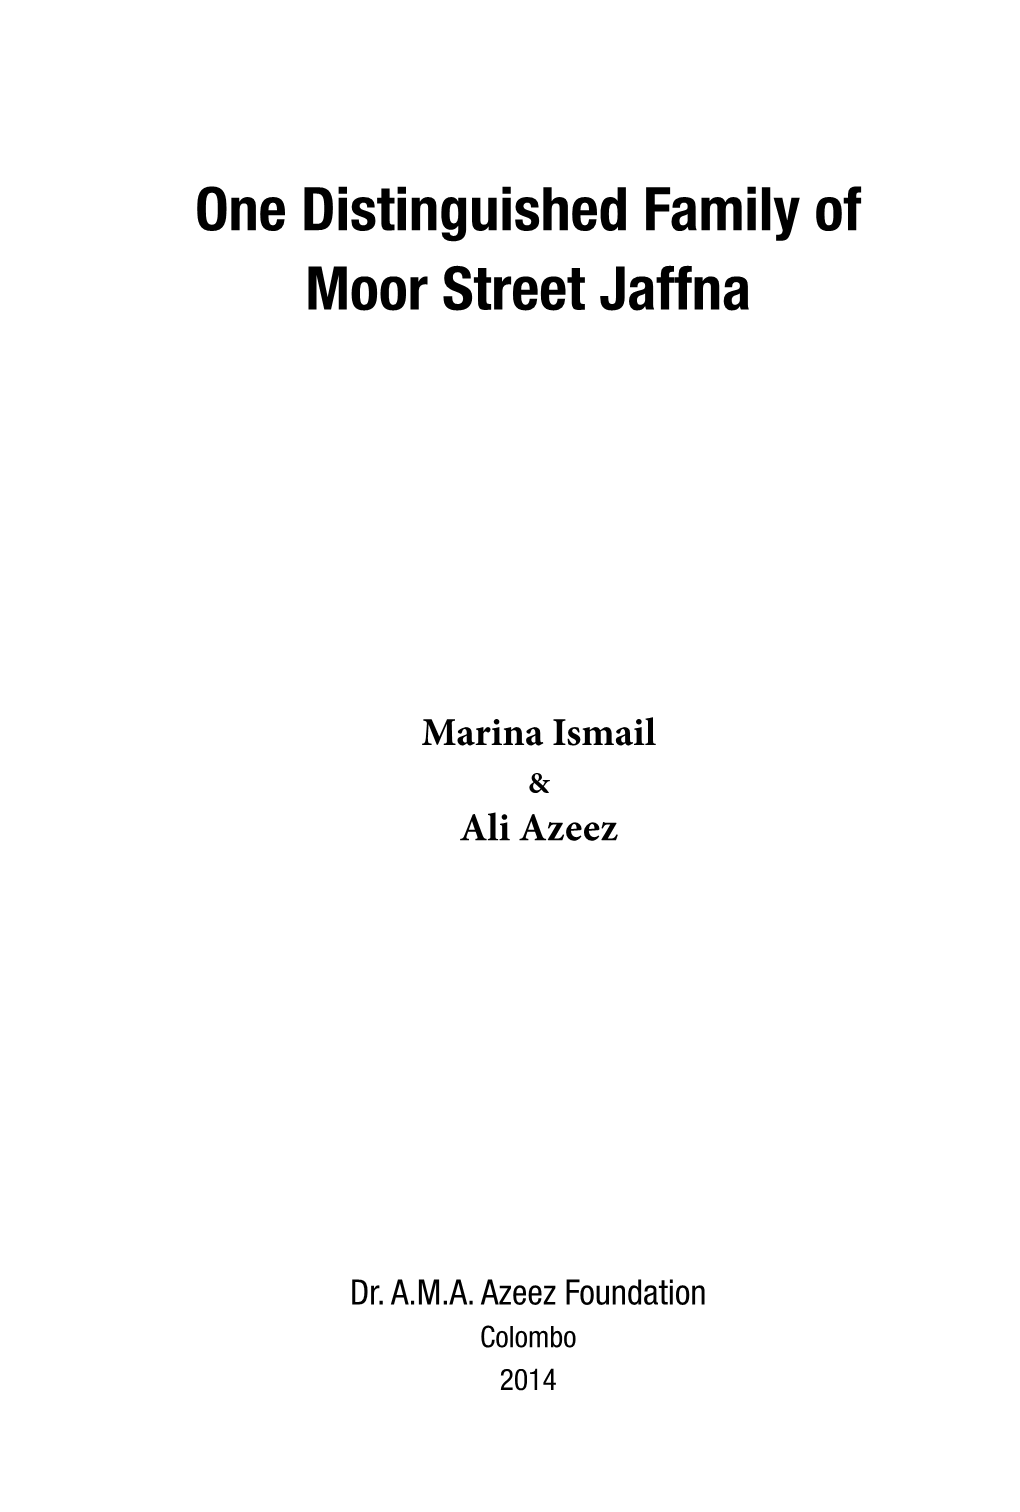 One Distinguished Family of Moor Street Jaffna